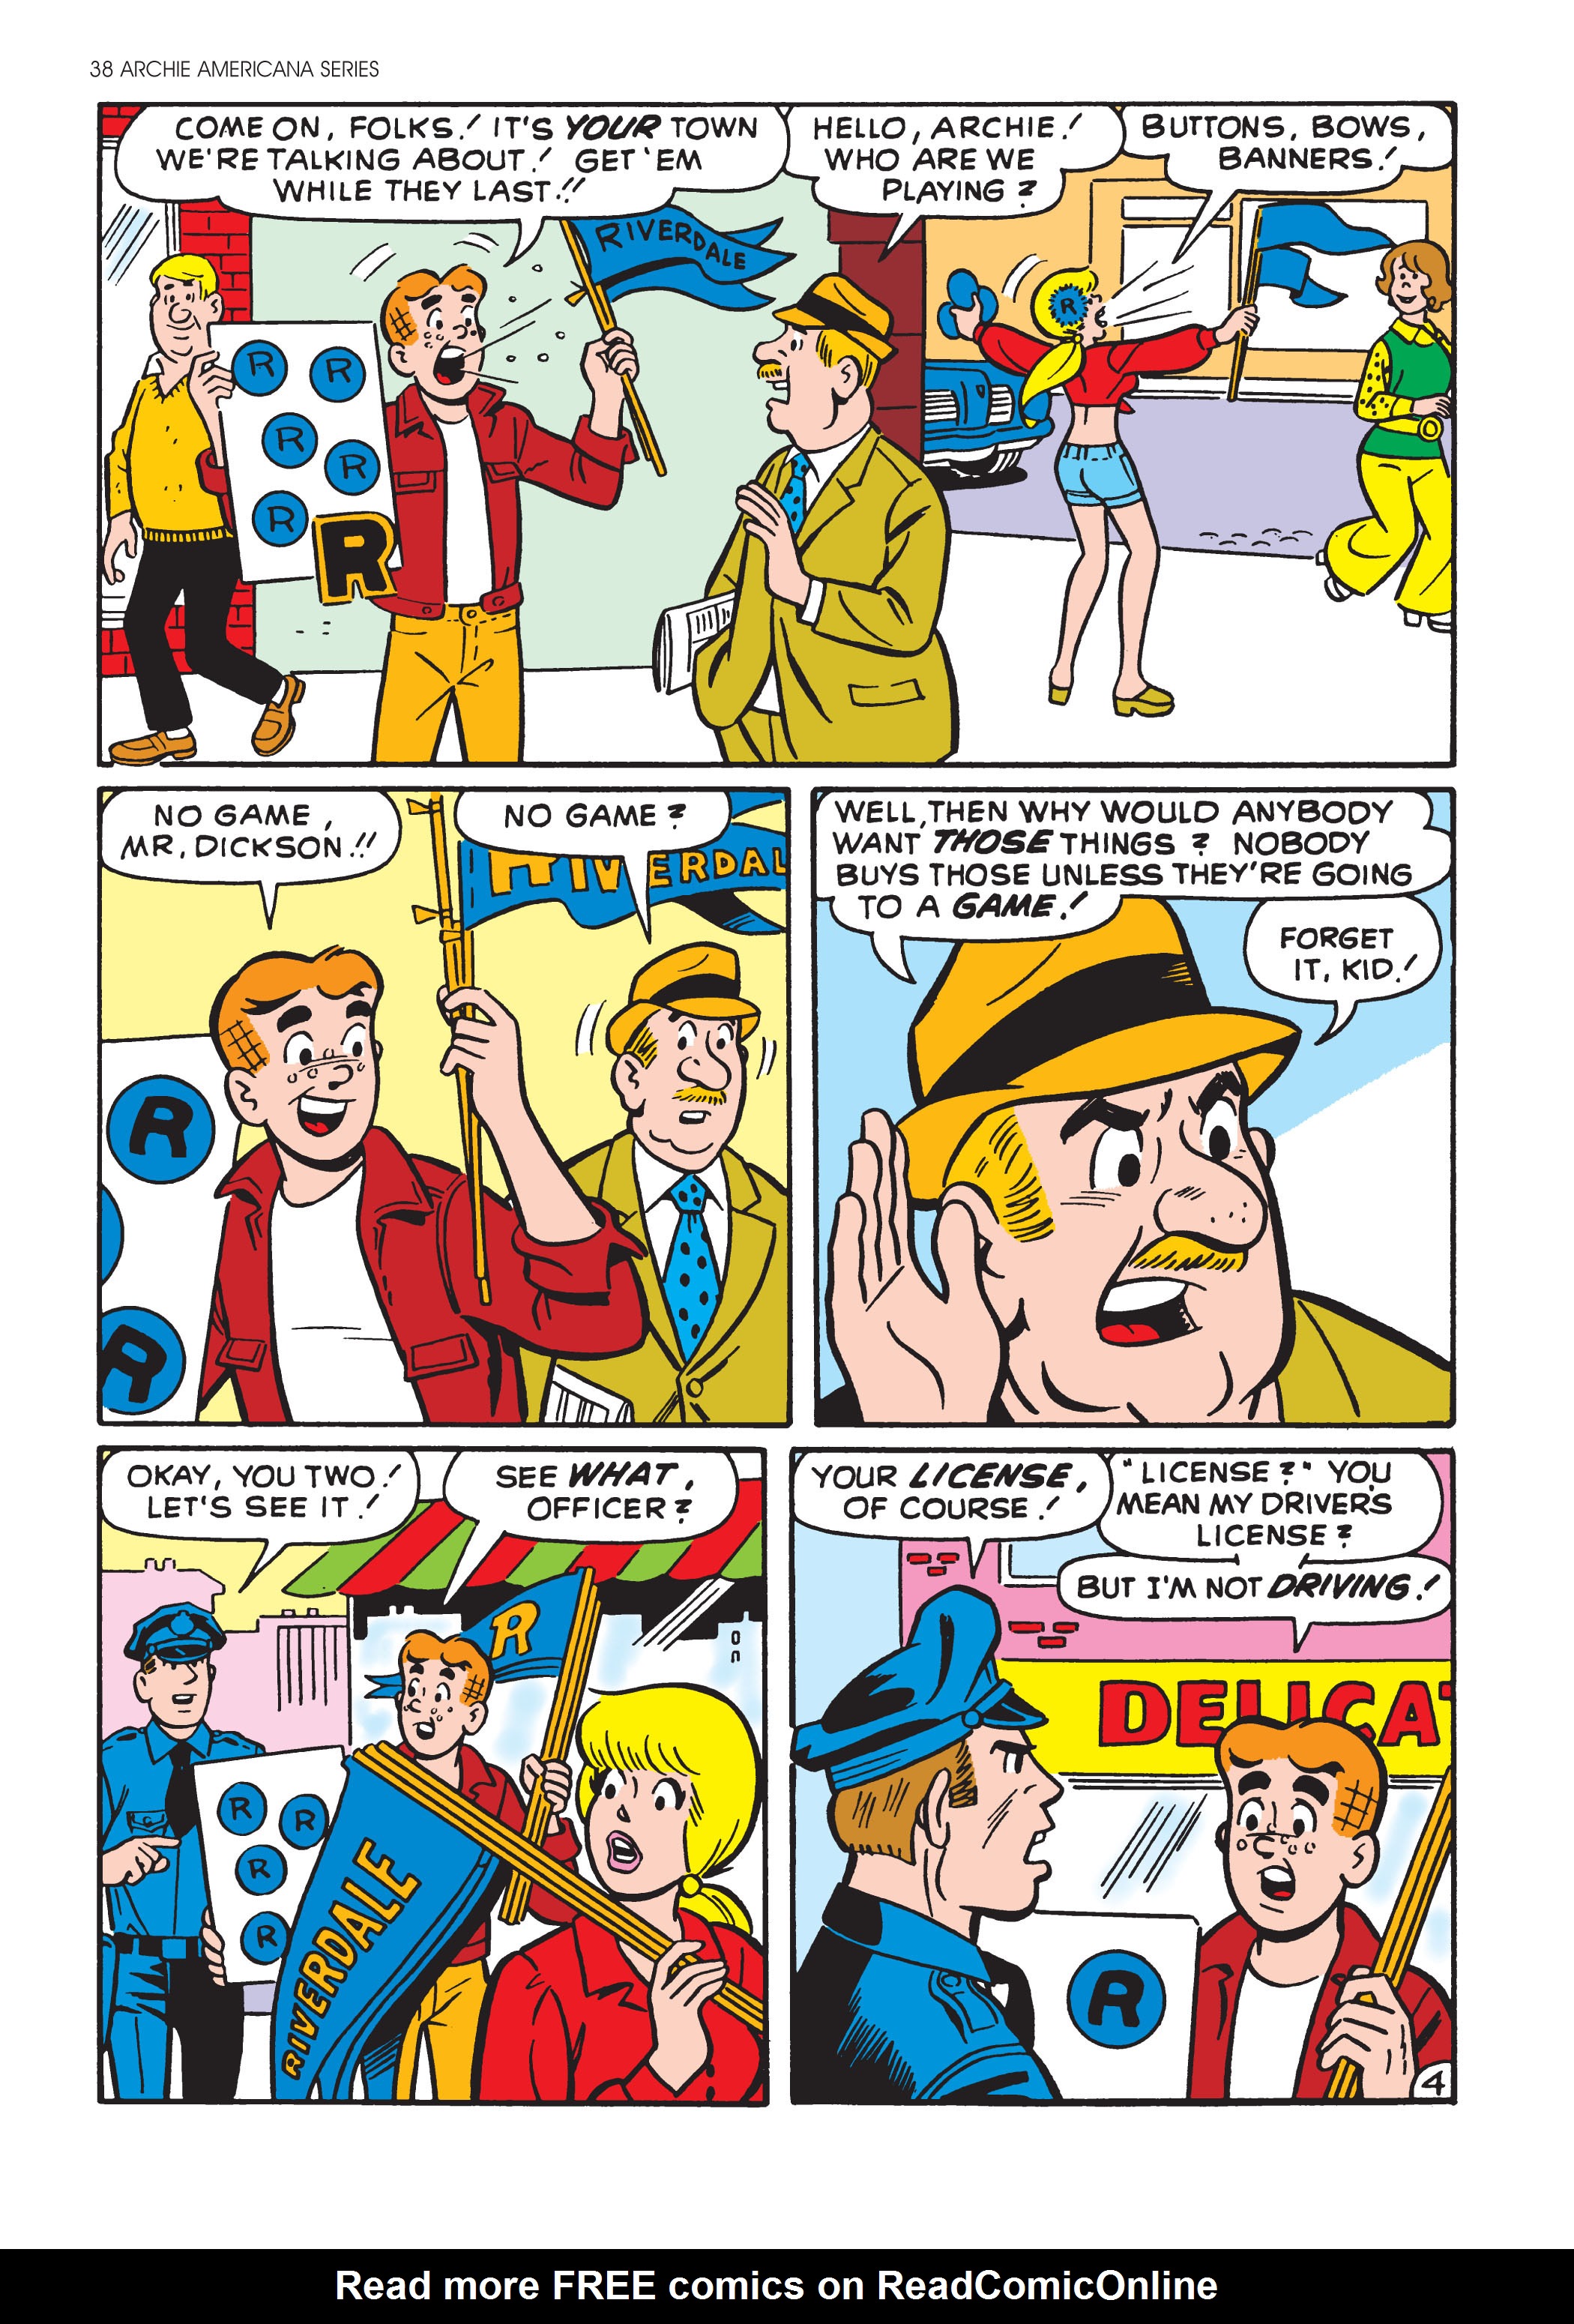 Read online Archie Americana Series comic -  Issue # TPB 4 - 40